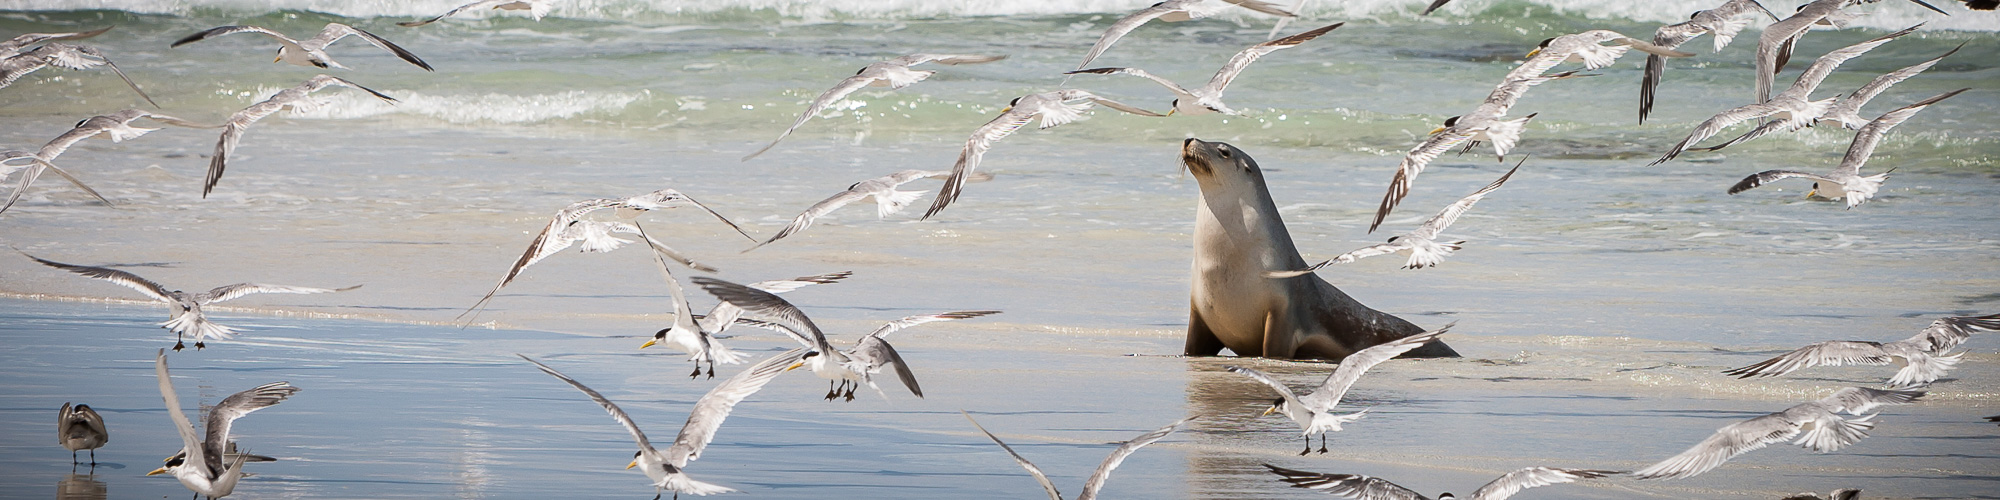 Sea Lion and Gulls, Seal Bay Conservation Park